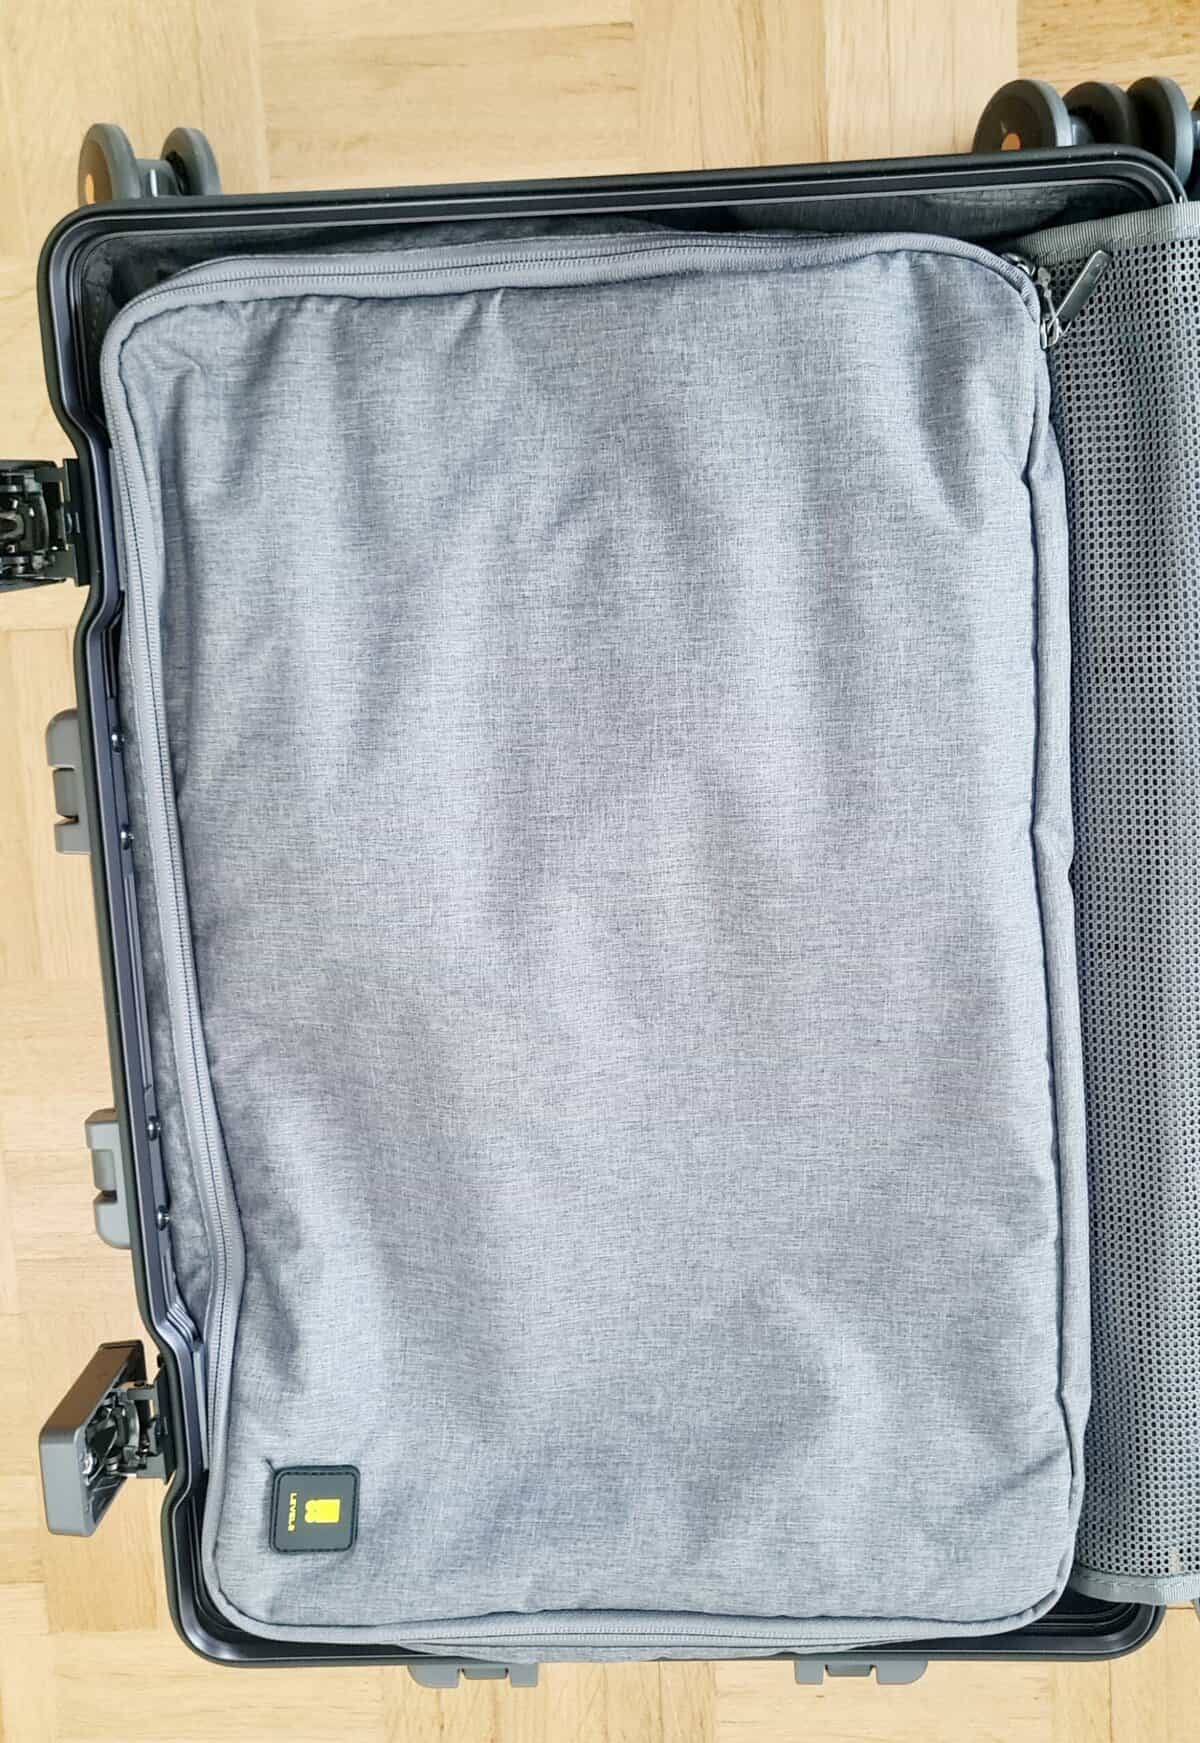 level8 luggage review (13)